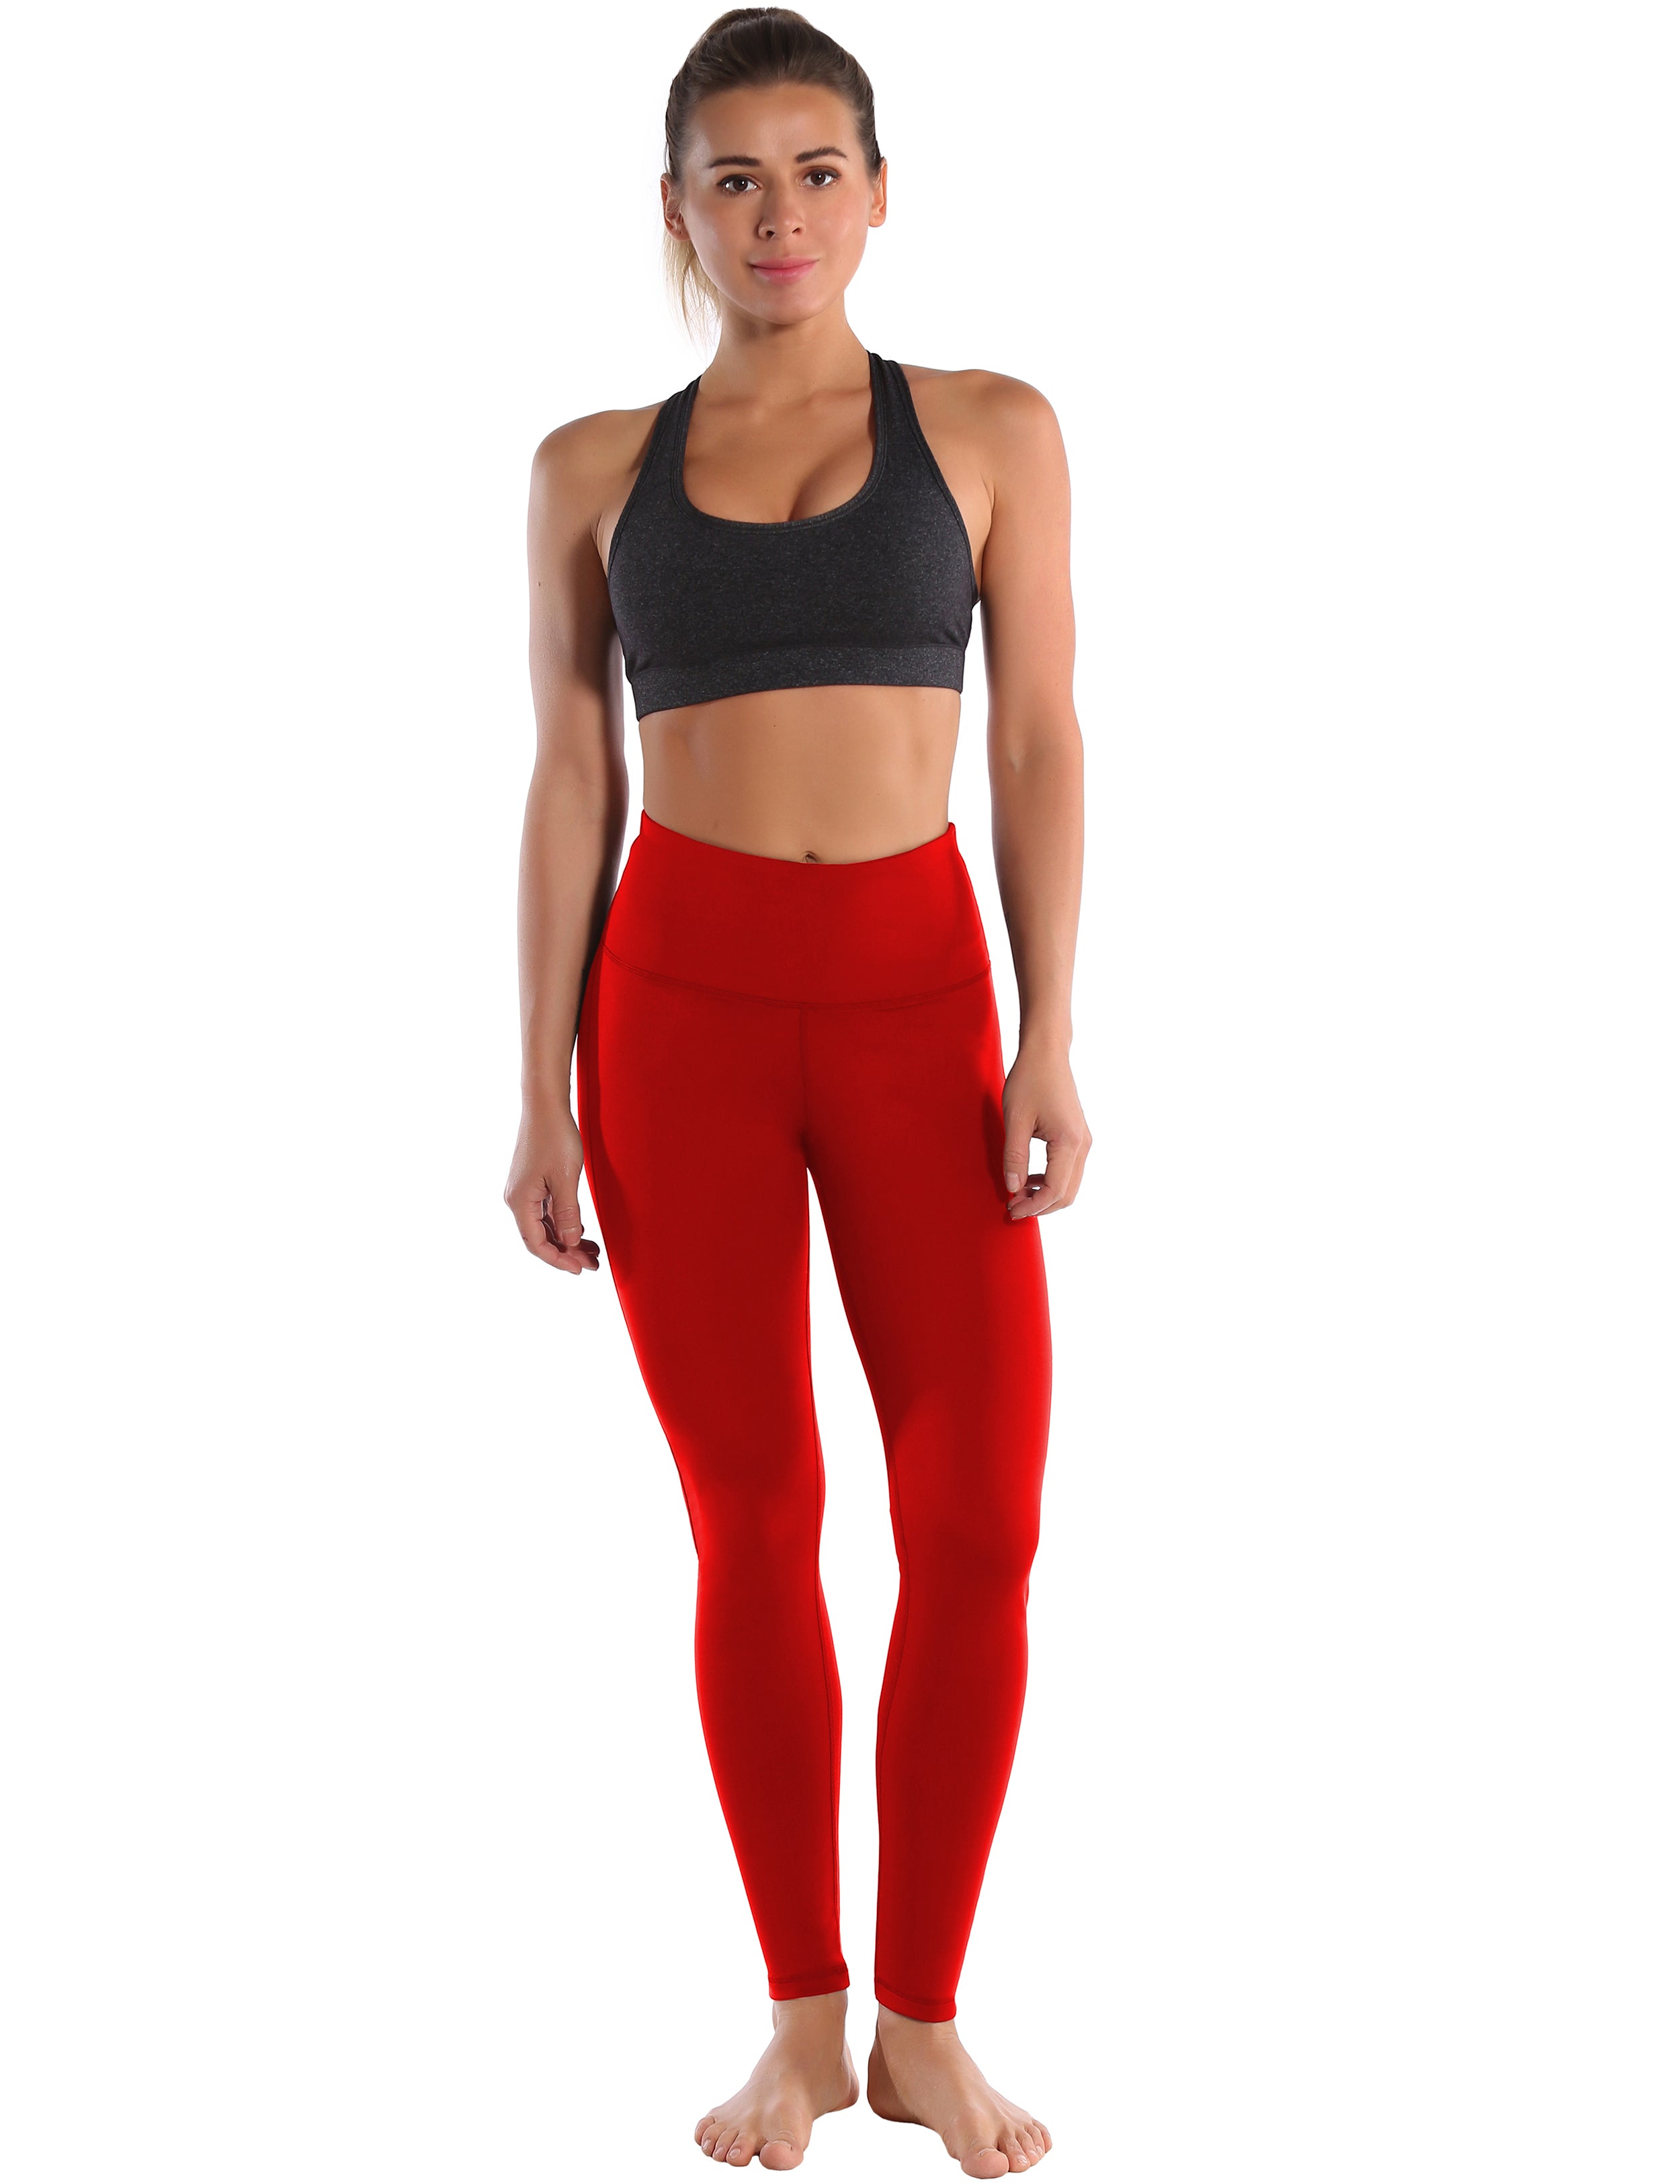 High Waist Side Line Yoga Pants scarlet Side Line is Make Your Legs Look Longer and Thinner 75%Nylon/25%Spandex Fabric doesn't attract lint easily 4-way stretch No see-through Moisture-wicking Tummy control Inner pocket Two lengths